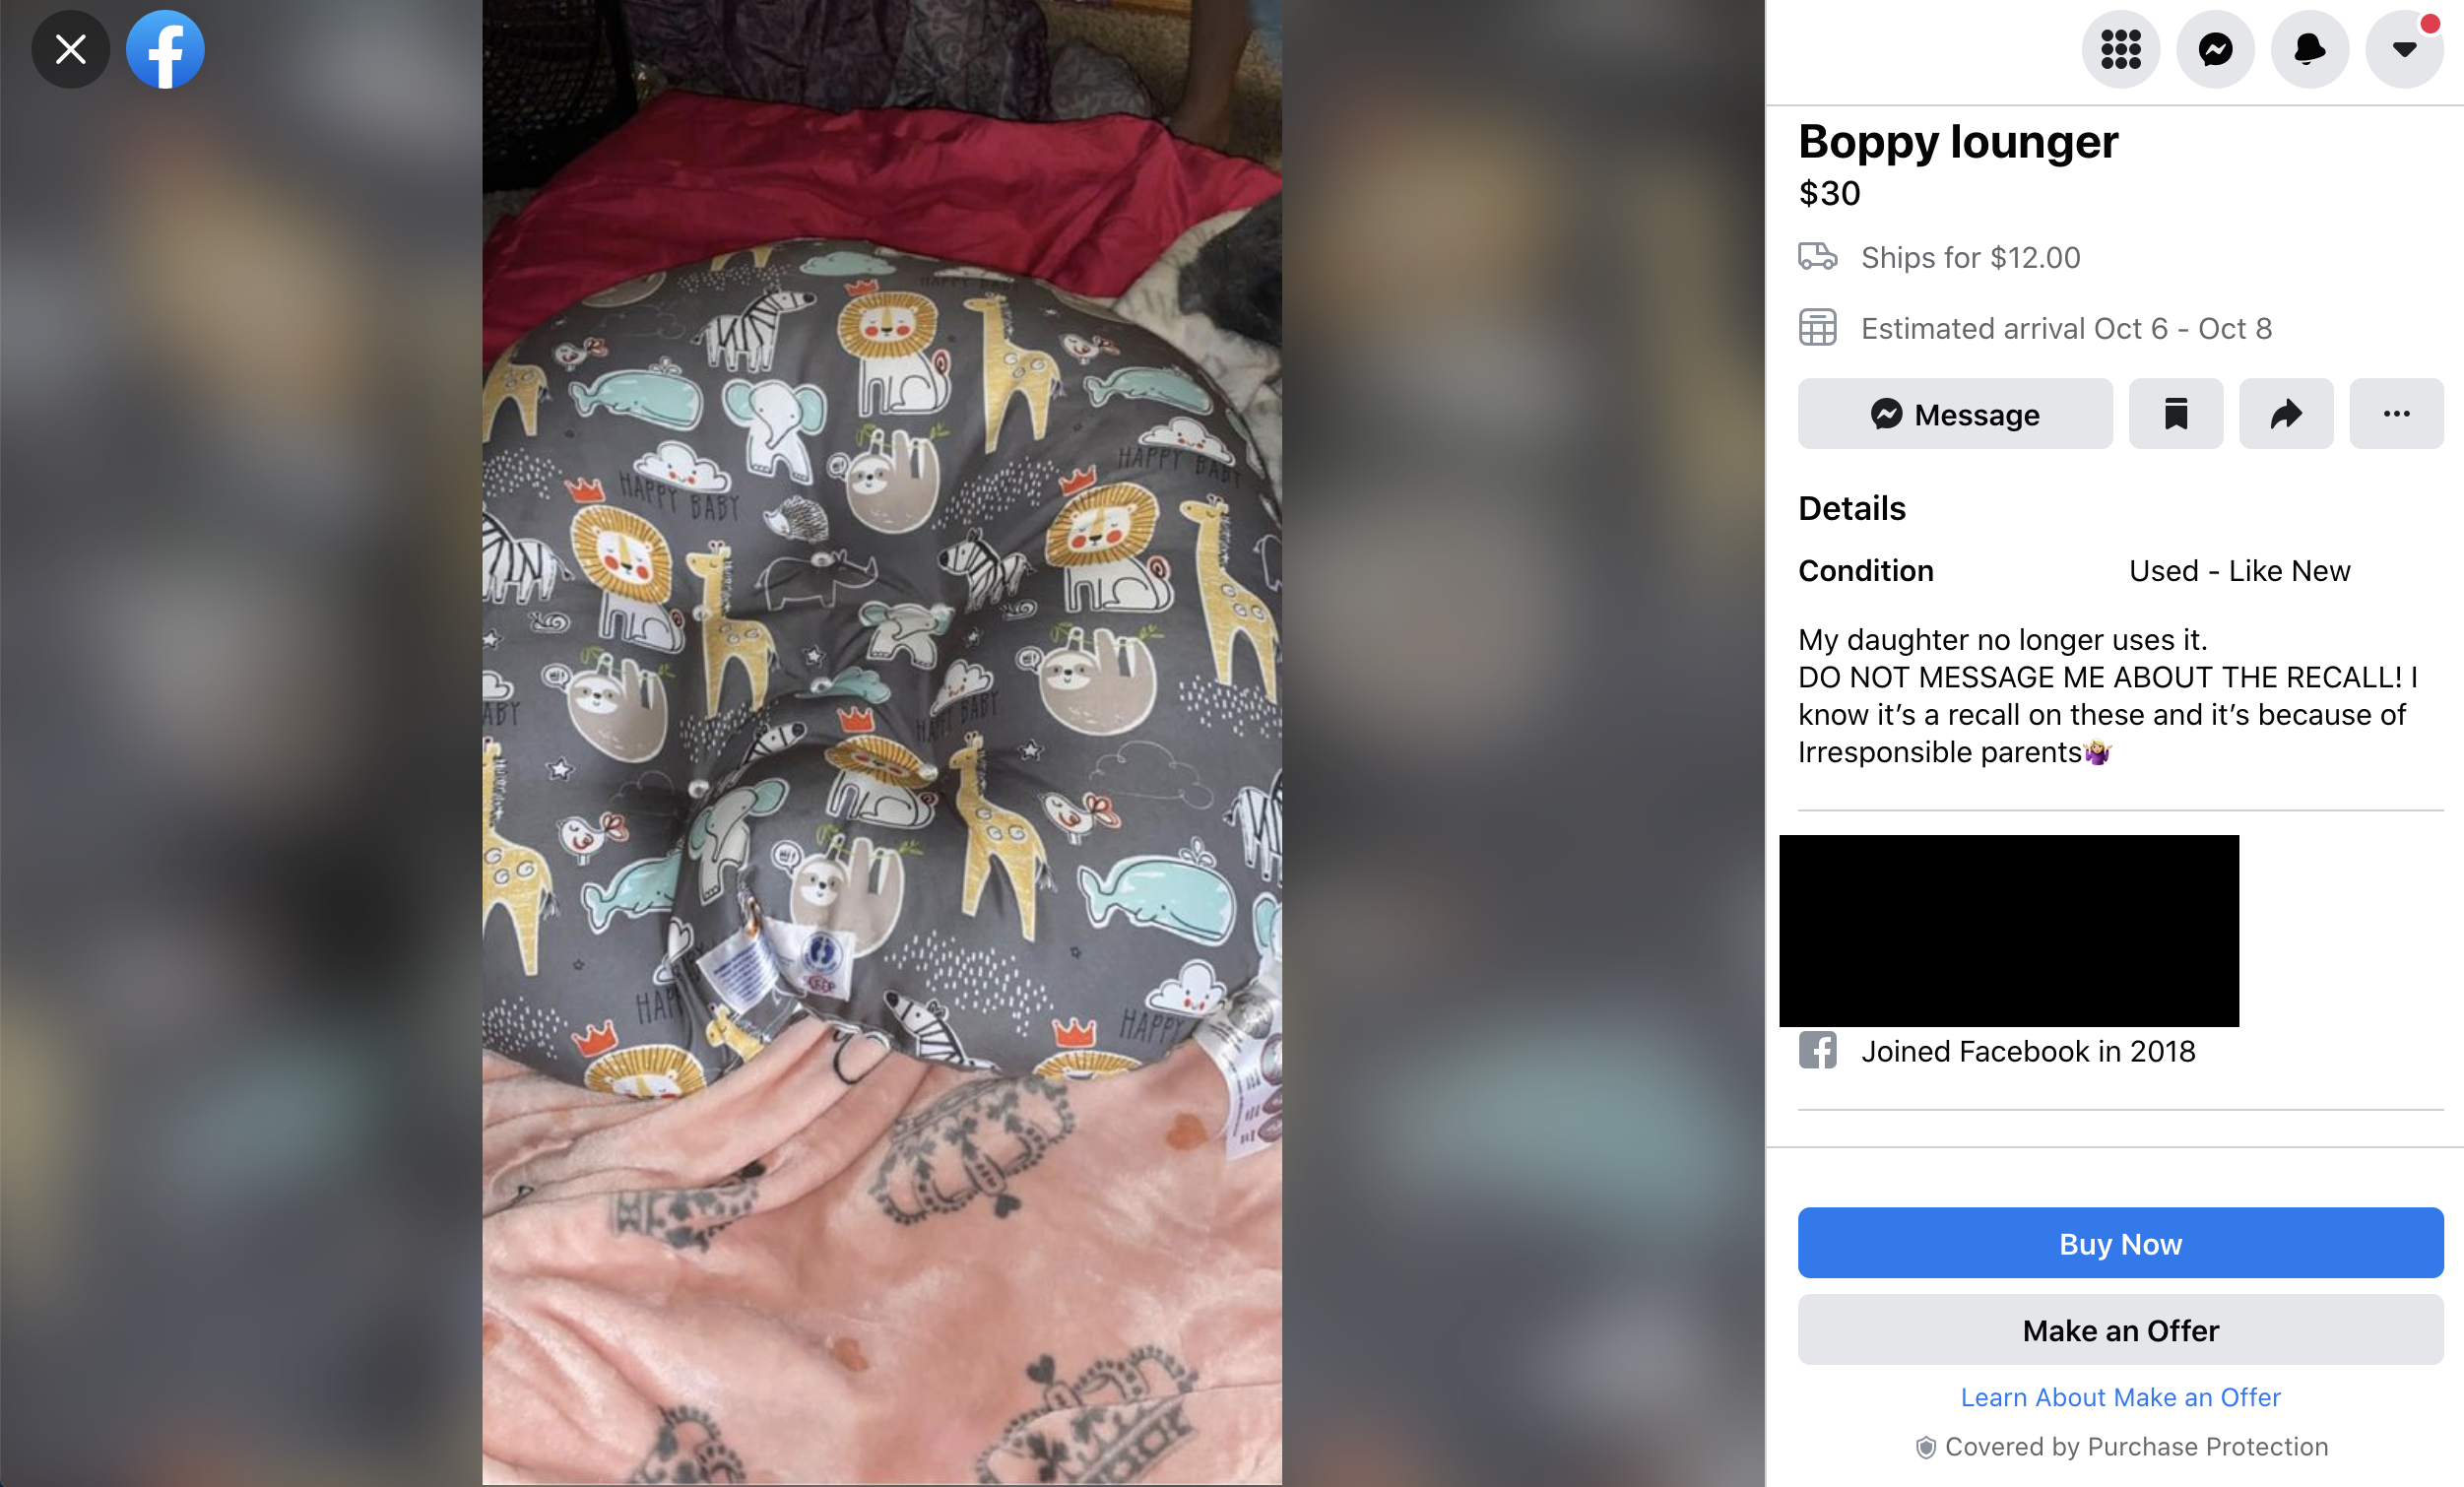 While many people selling the Boppy lounger on Facebook Marketplace are likely unaware that it has been recalled, some know about the recall and are selling it anyway. One seller in Texas wrote in her post that she knew the product was recalled.